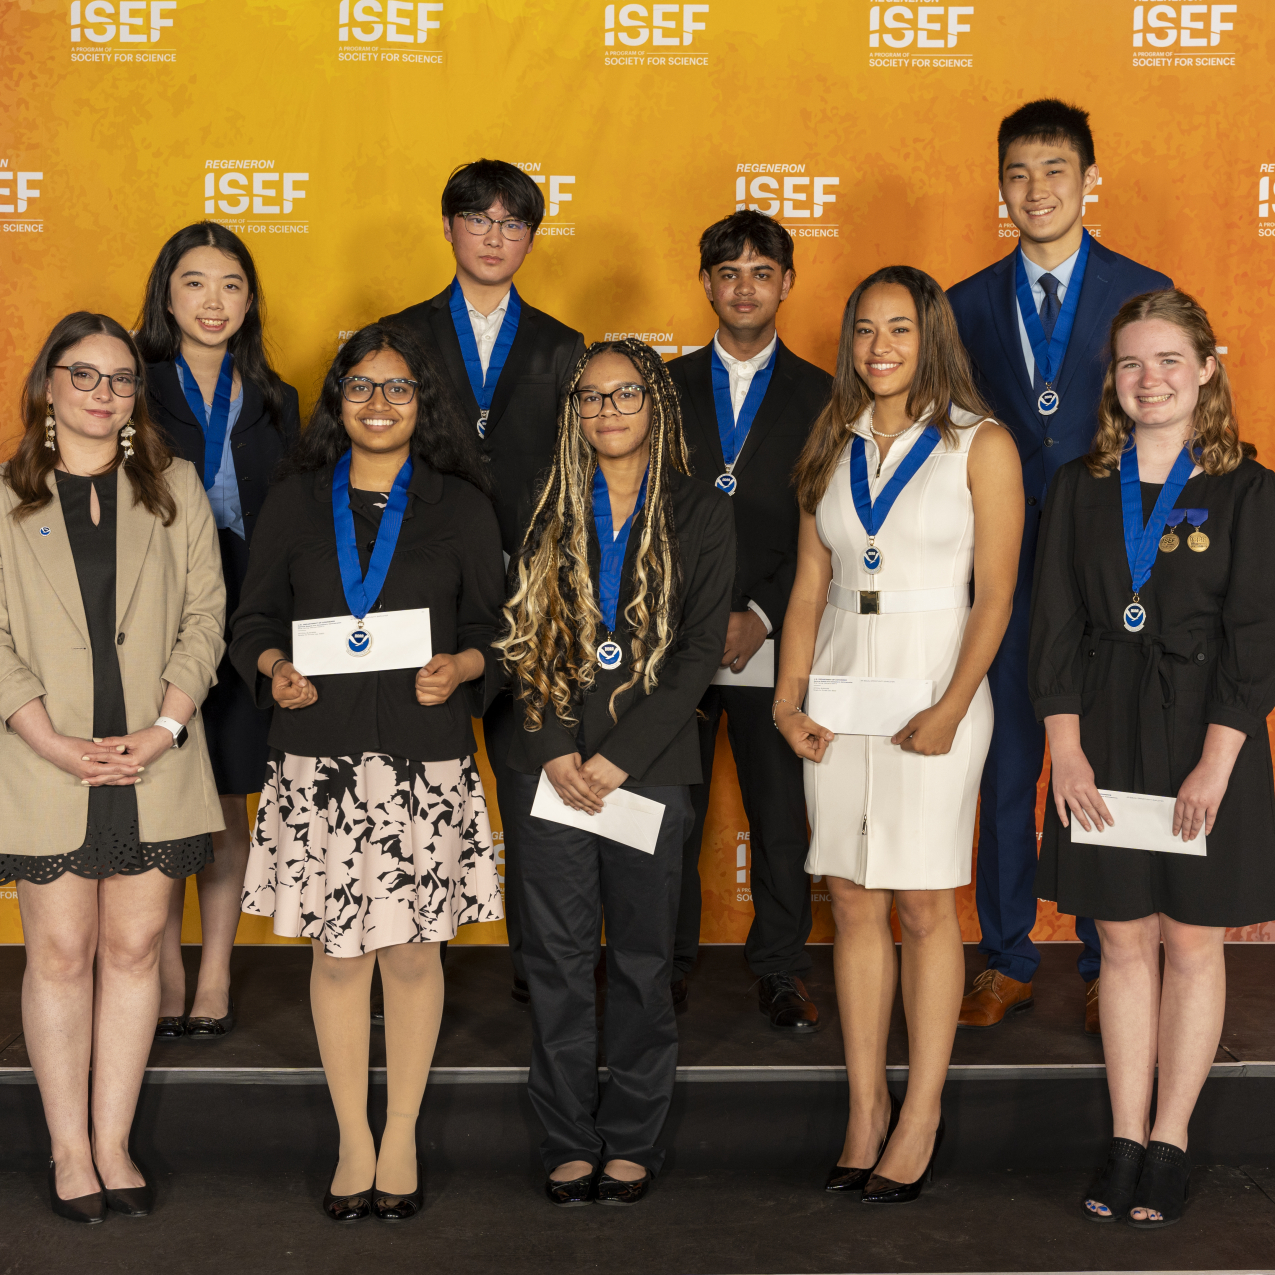 A group of nine young adults pose for a group photo in front of a backdrop with the ISEF logo.